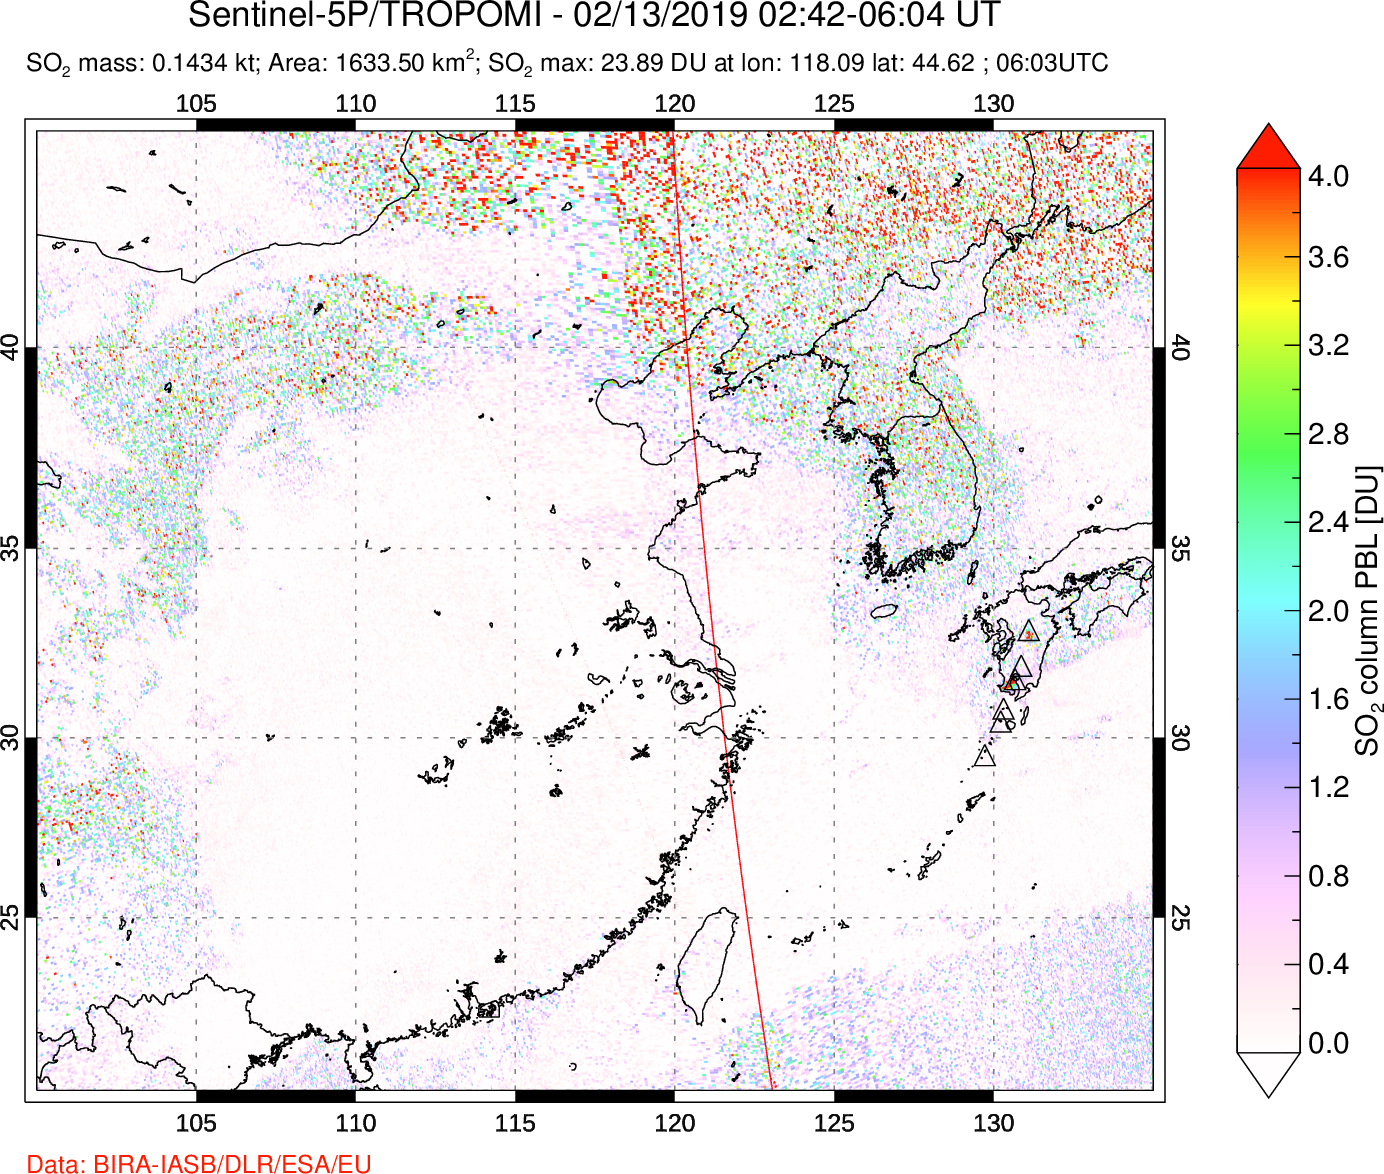 A sulfur dioxide image over Eastern China on Feb 13, 2019.